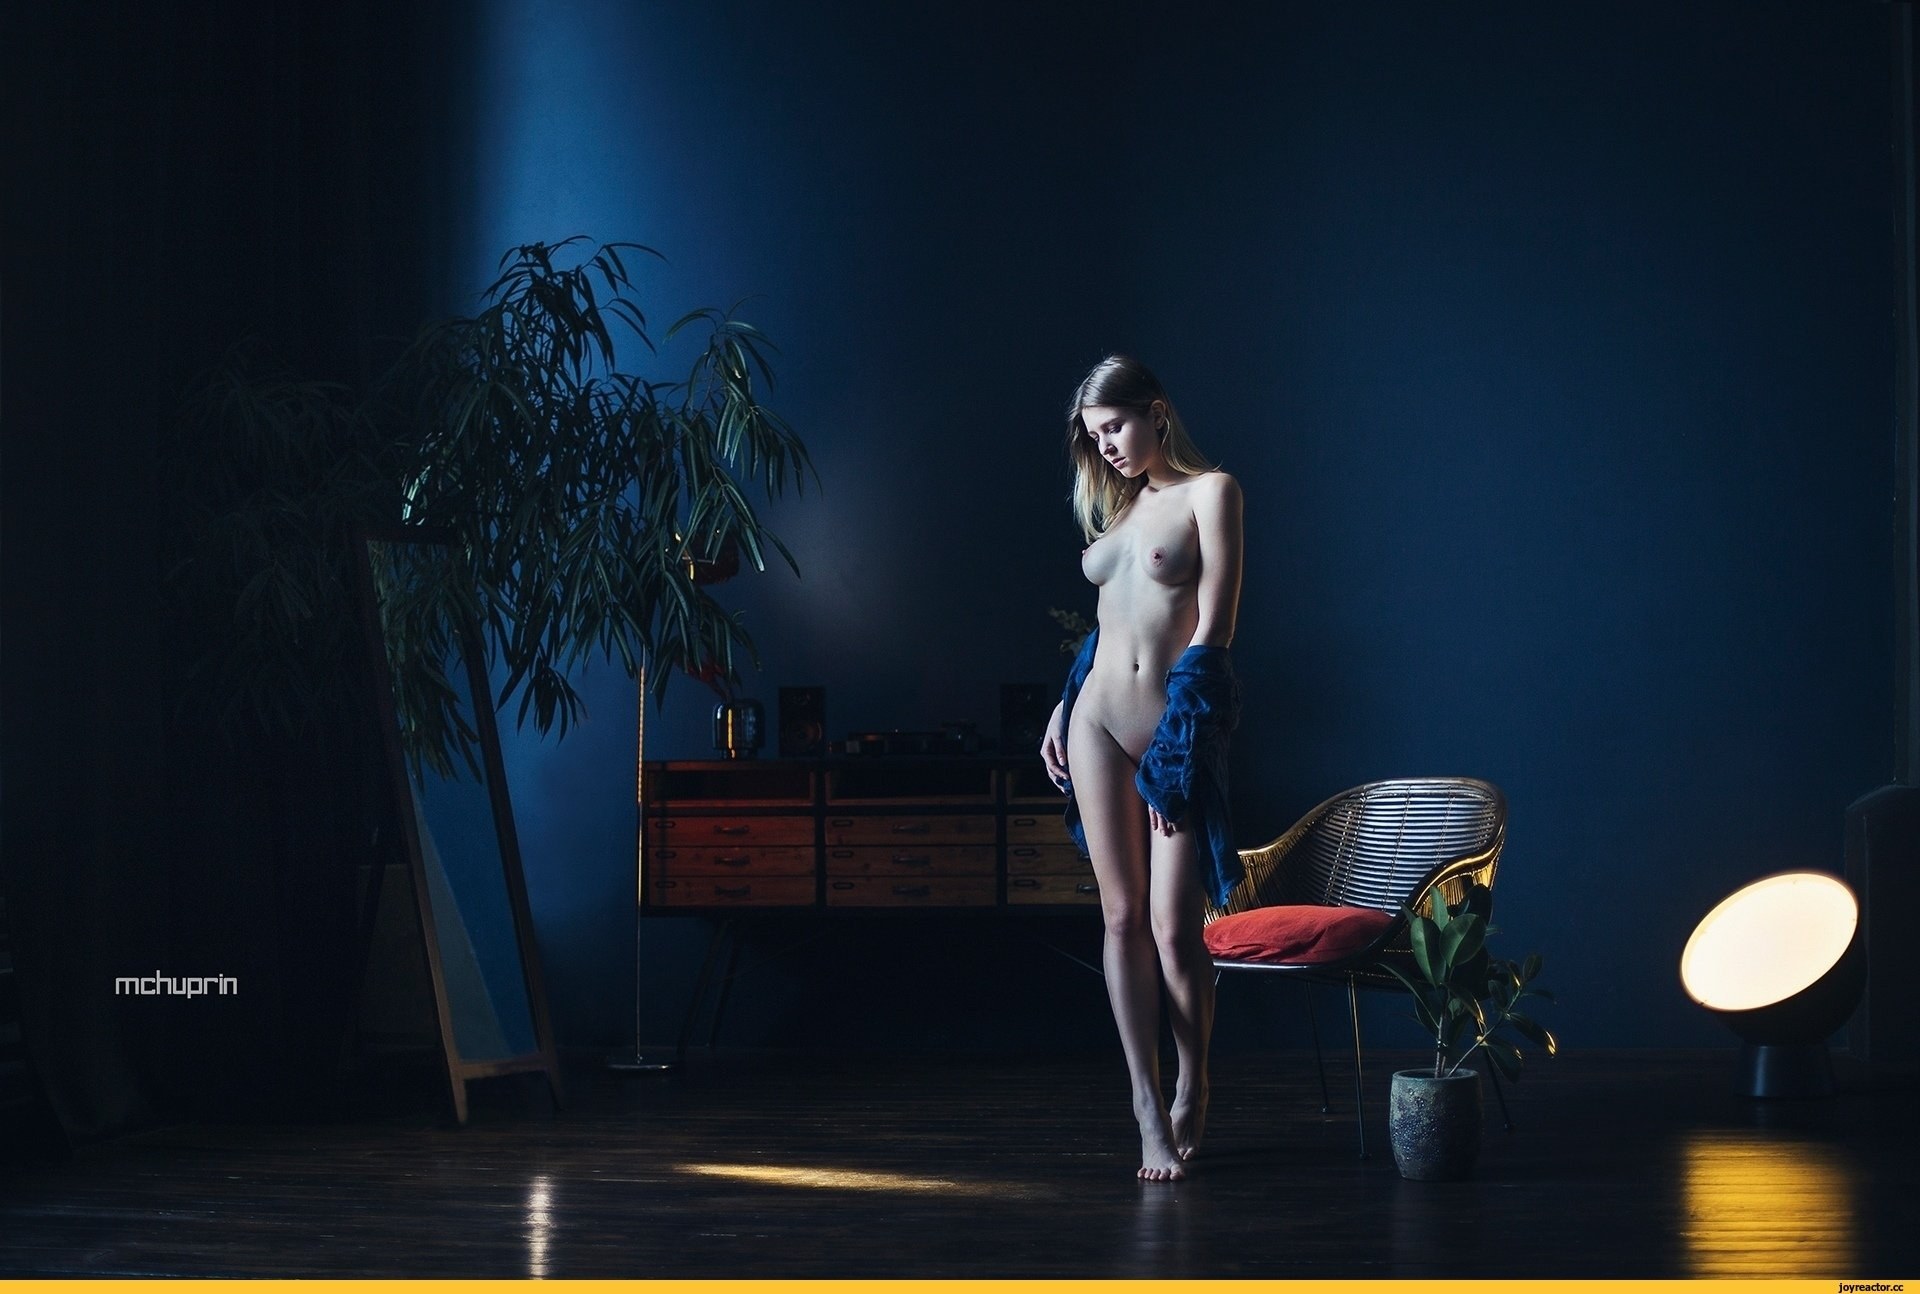 152 Gallery Site: Where Art Meets Erotica in a Stunning Photo Collection